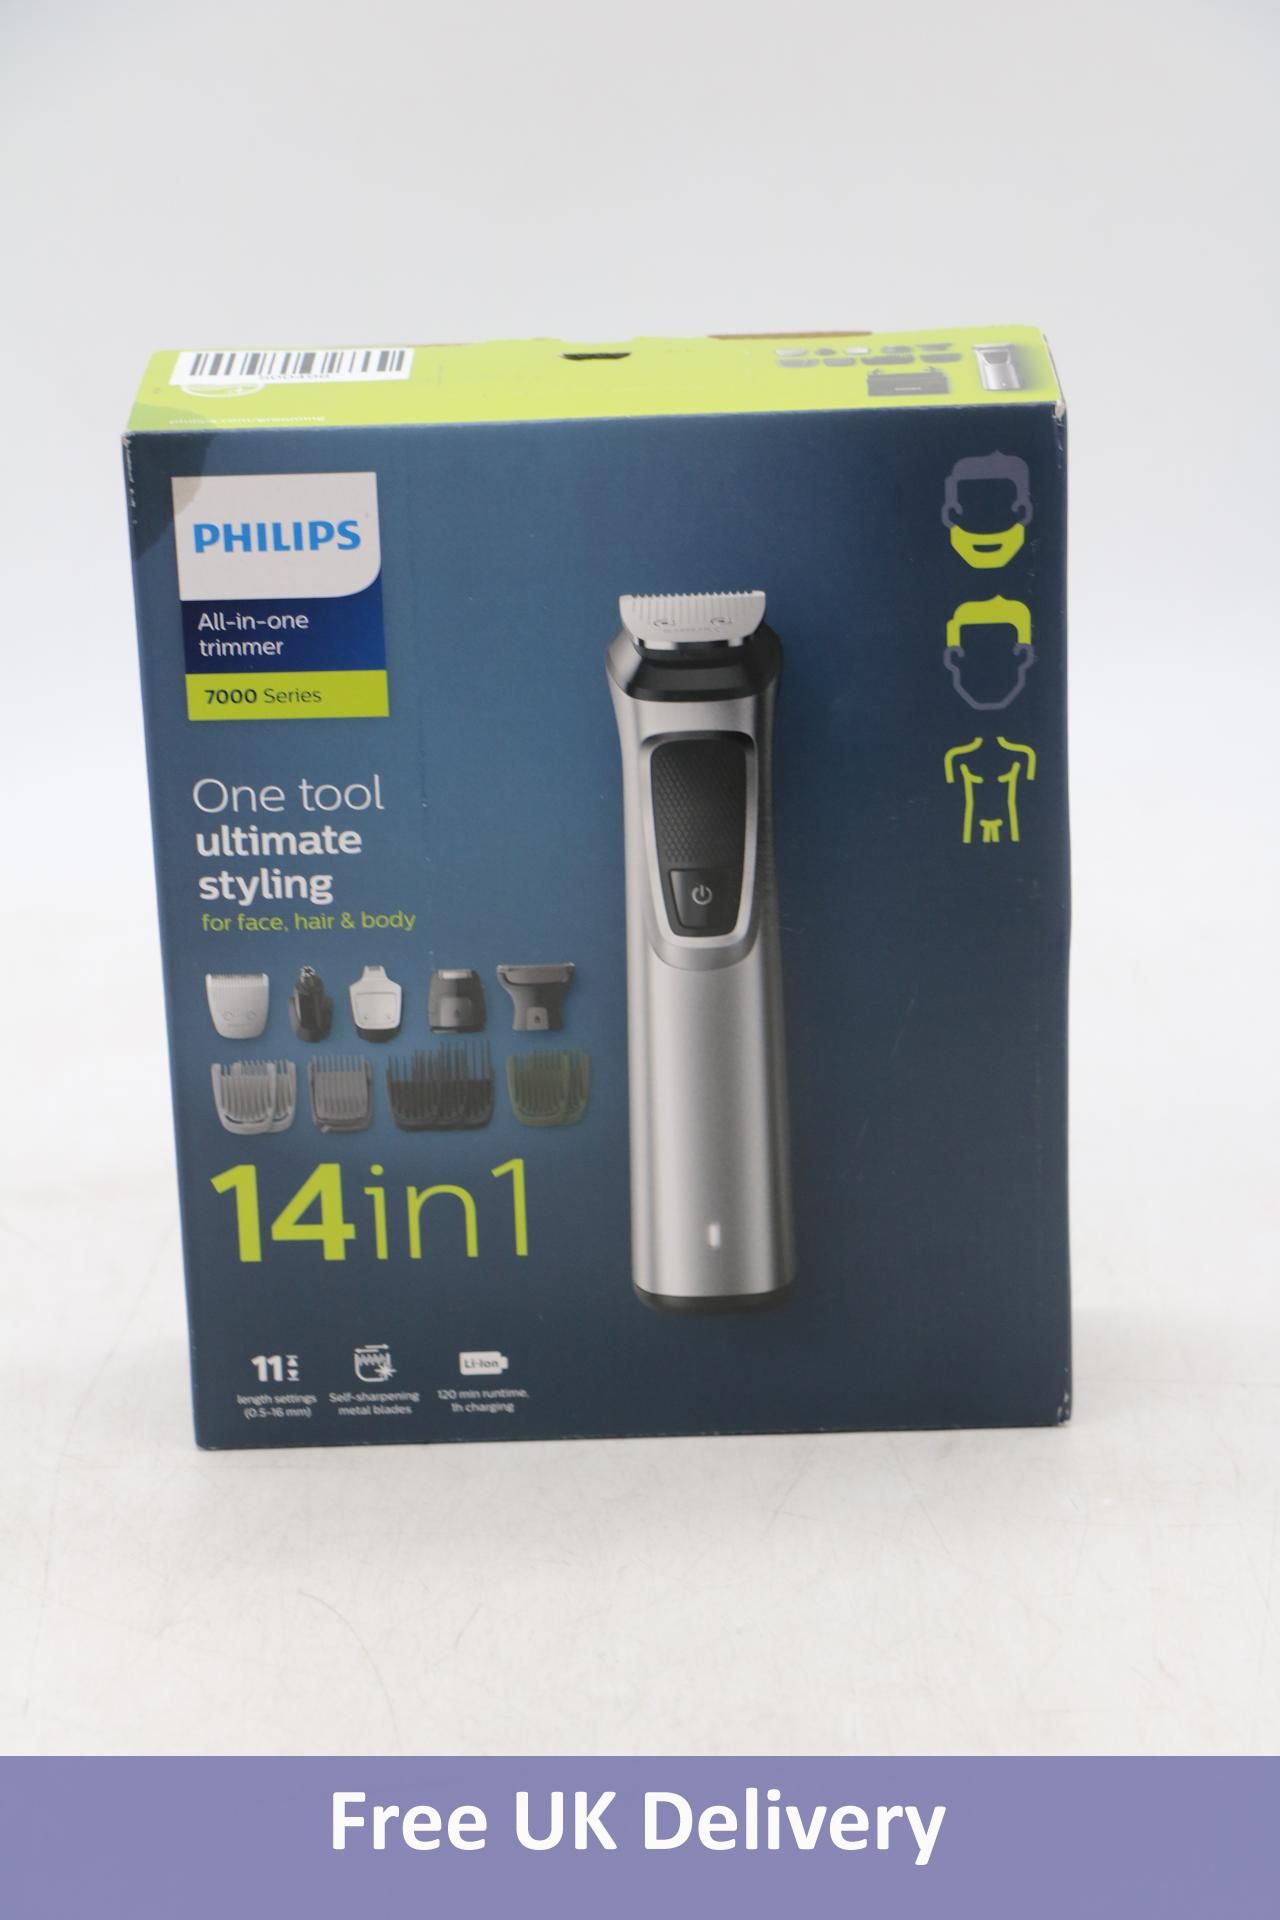 Philips All In Trimmer 7000 Series, 14 in 1